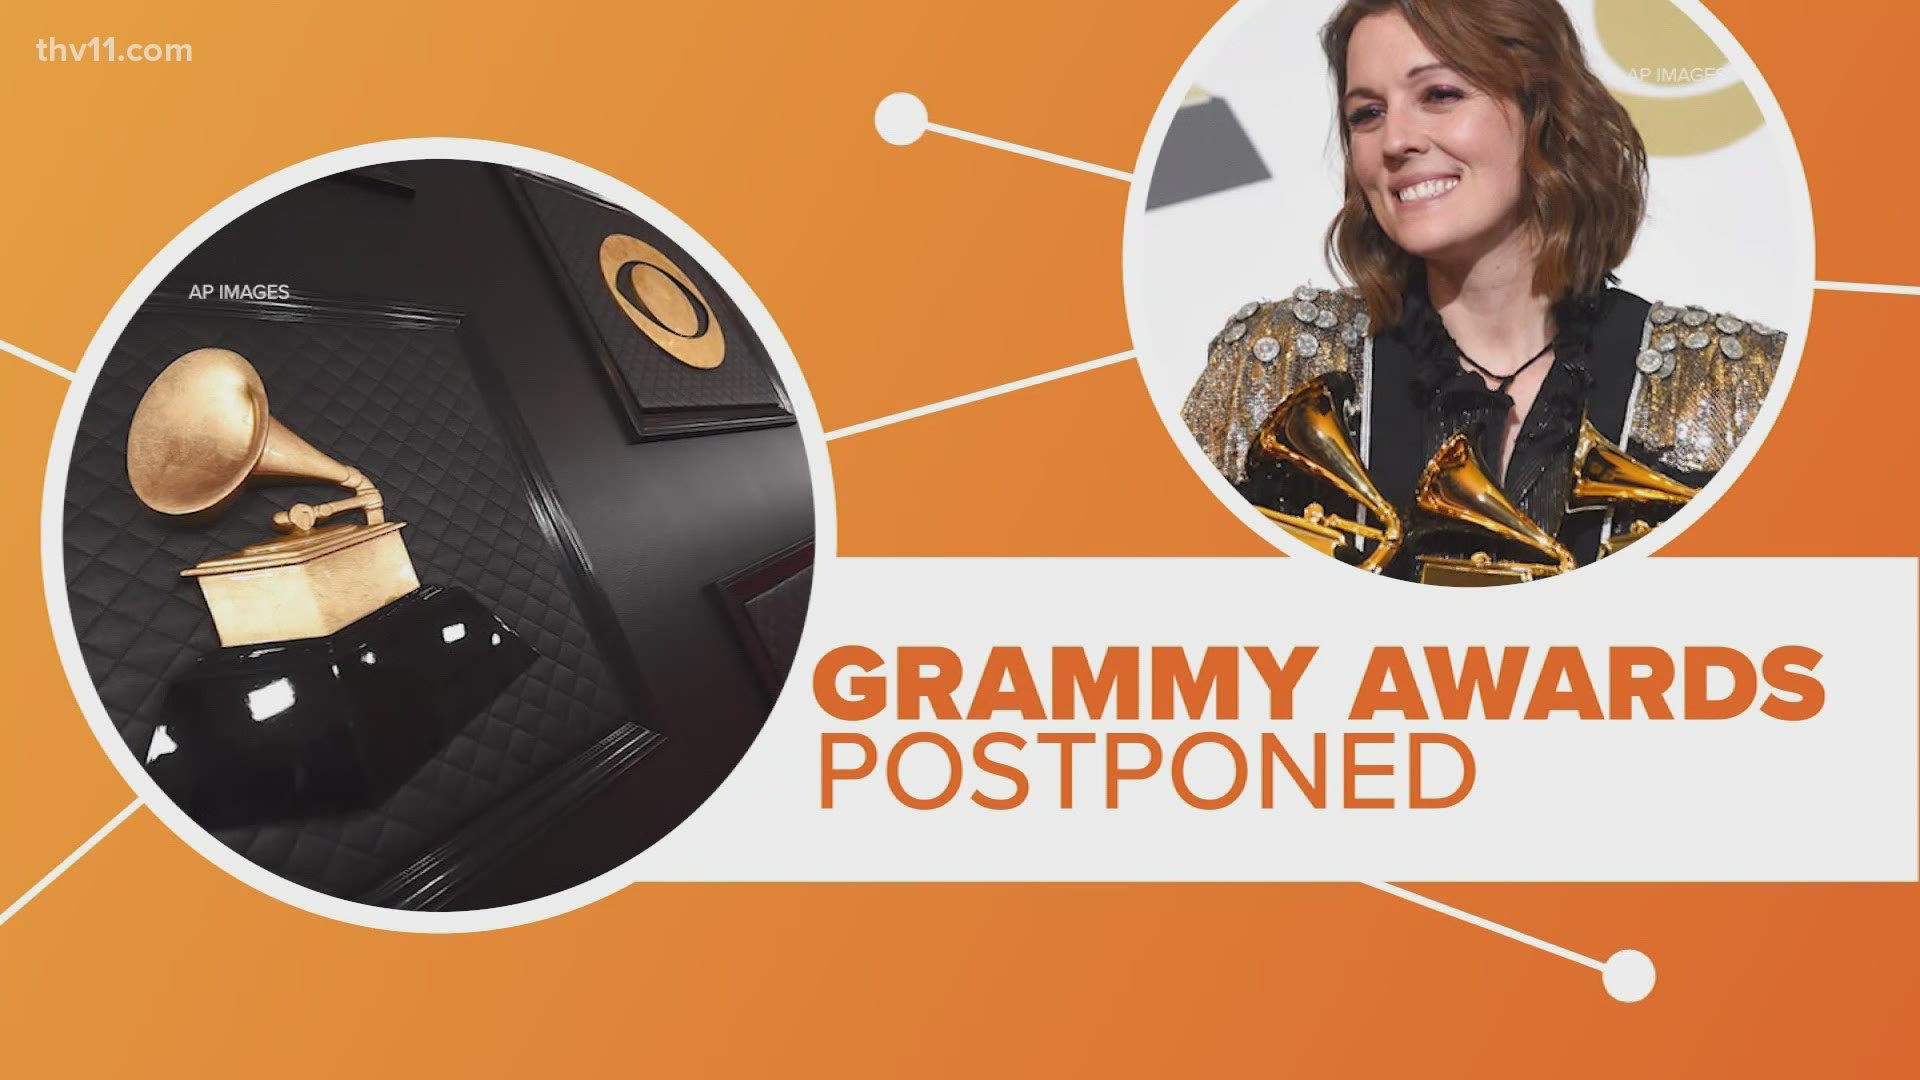 The Grammy Awards have been postponed. It'll now be held in March.